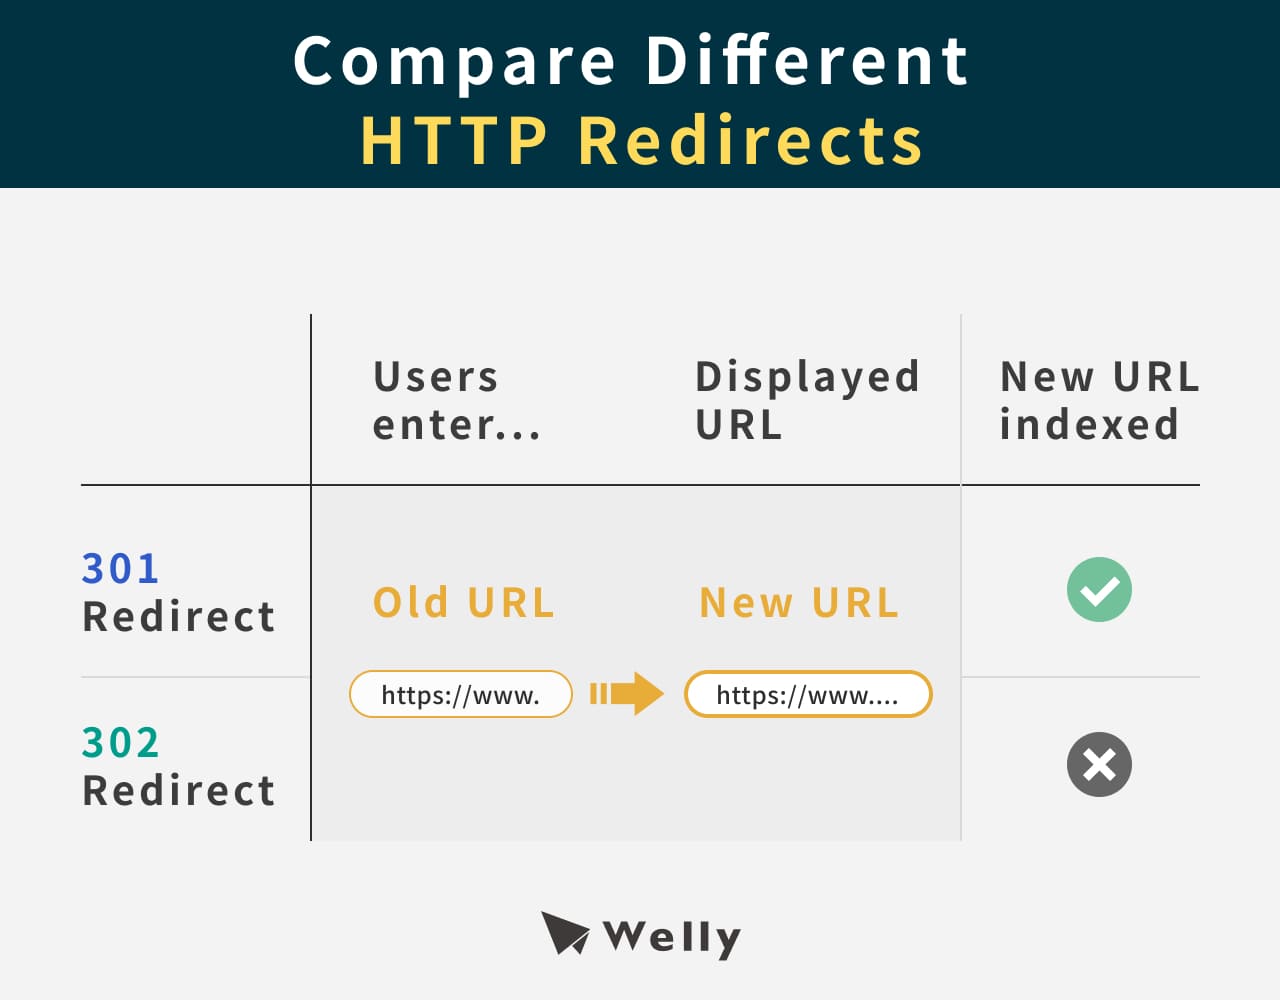 Compare Different HTTP Redirects